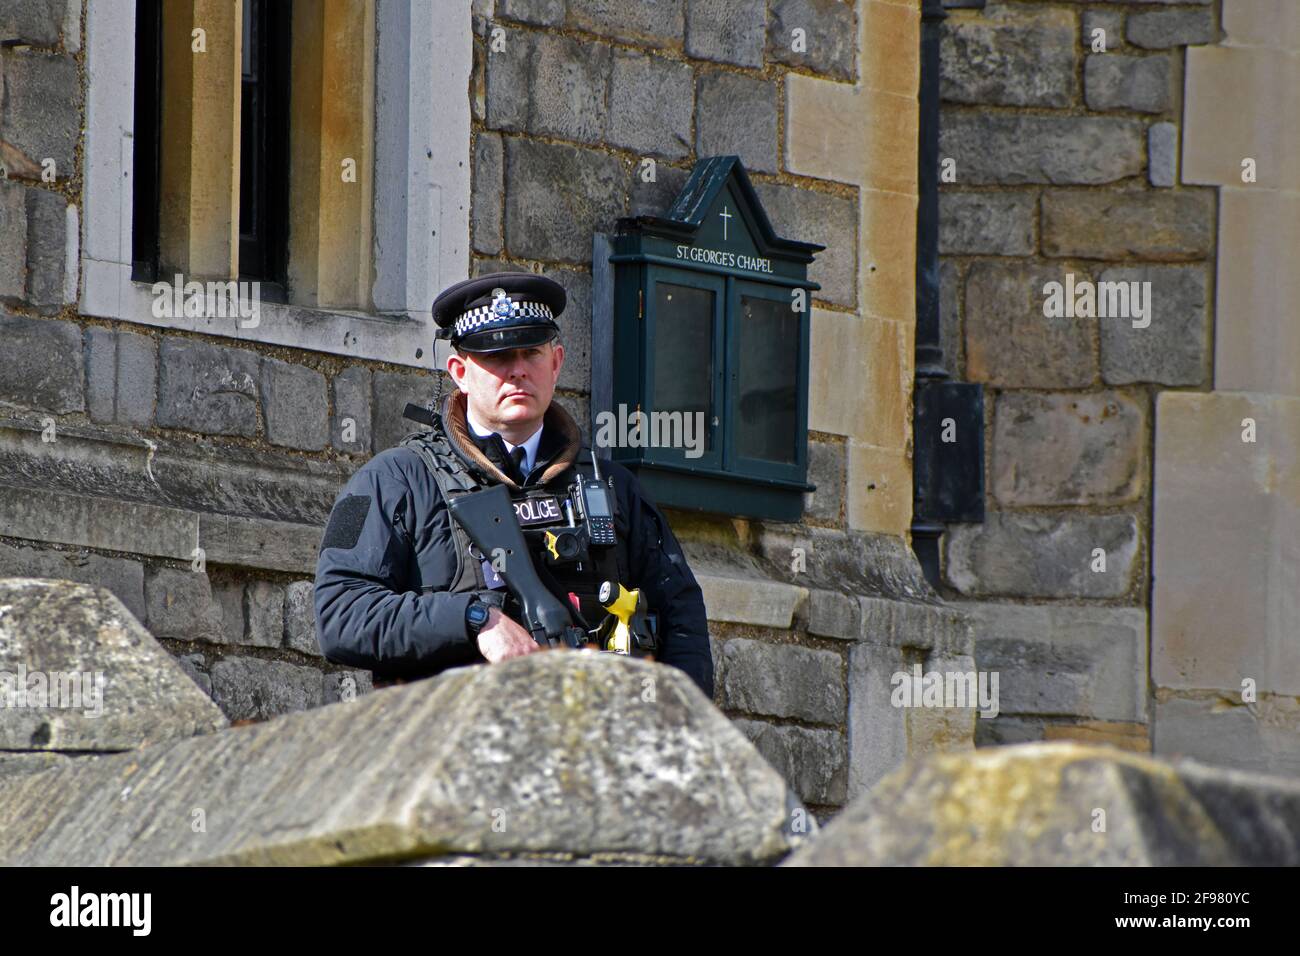 Windsor, UK. 16th Apr, 2020. Armed police at Windsor Castle. St George's Chapel protected ahead of preparations for funeral. Windsor castle busy with tourists as well as preparations for Prince Phillip, the Duke of Edinburgh funeral. Credit: JOHNNY ARMSTEAD/Alamy Live News Stock Photo